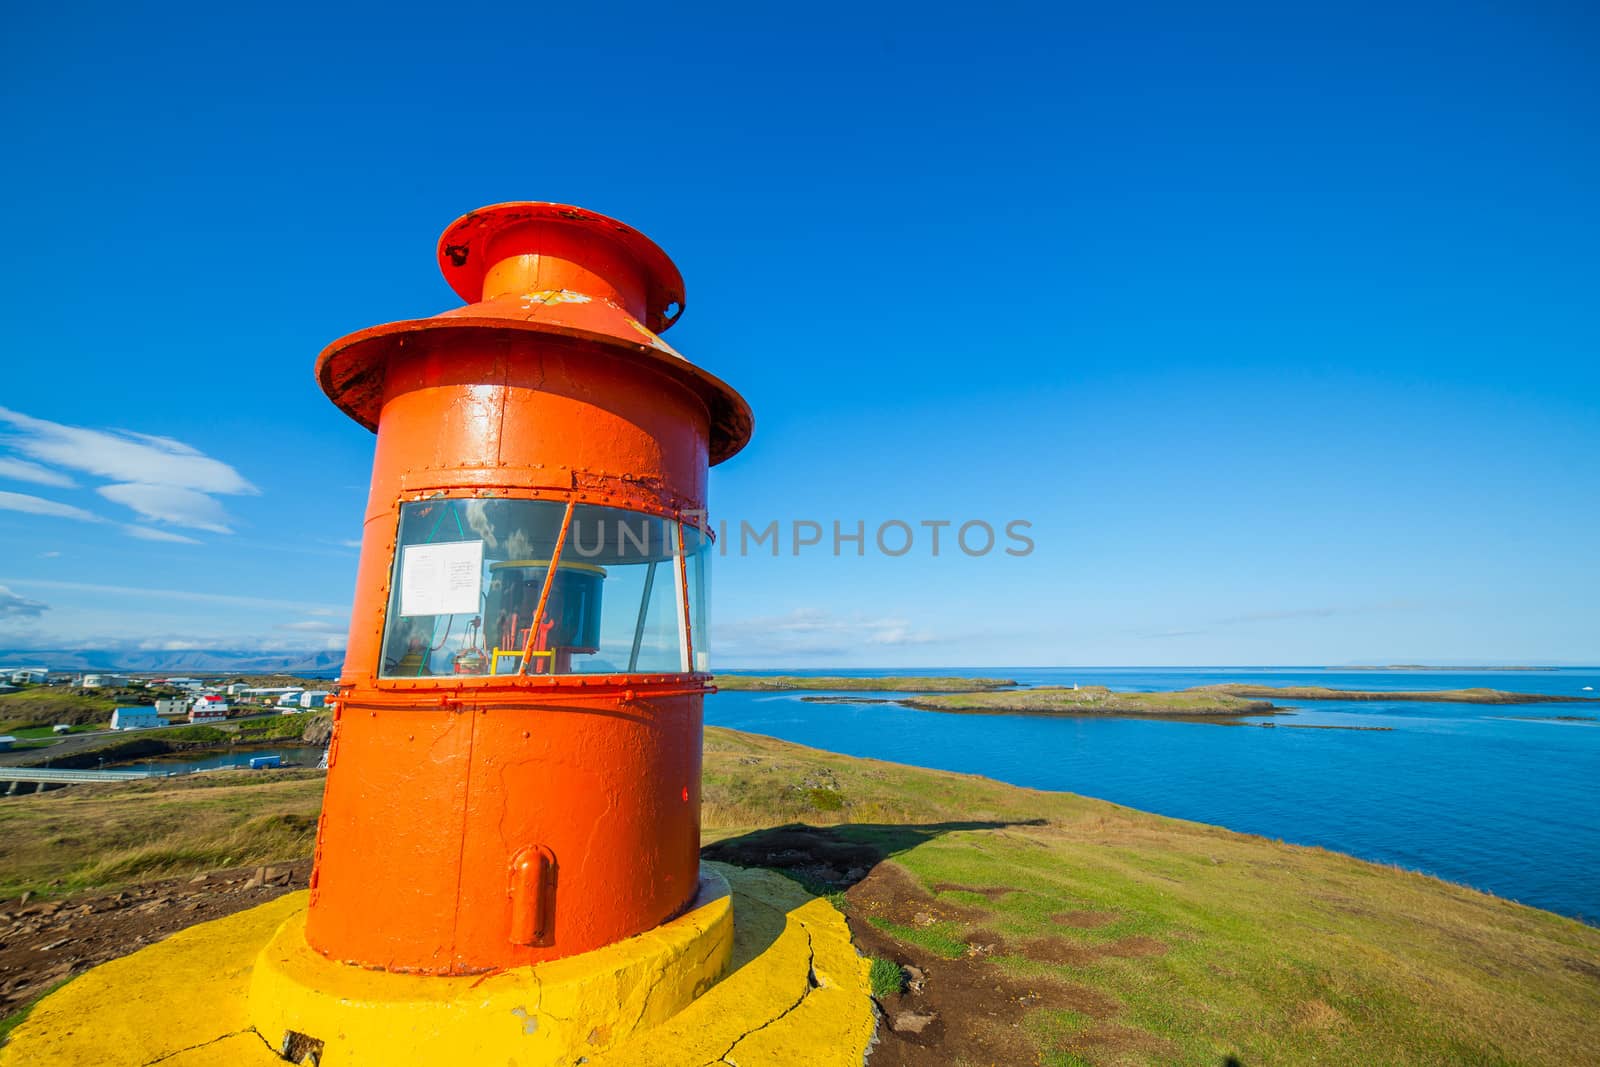 Red lighthouse in Stykkisholmur, Iceland on the Snaefellsnes peninsula.